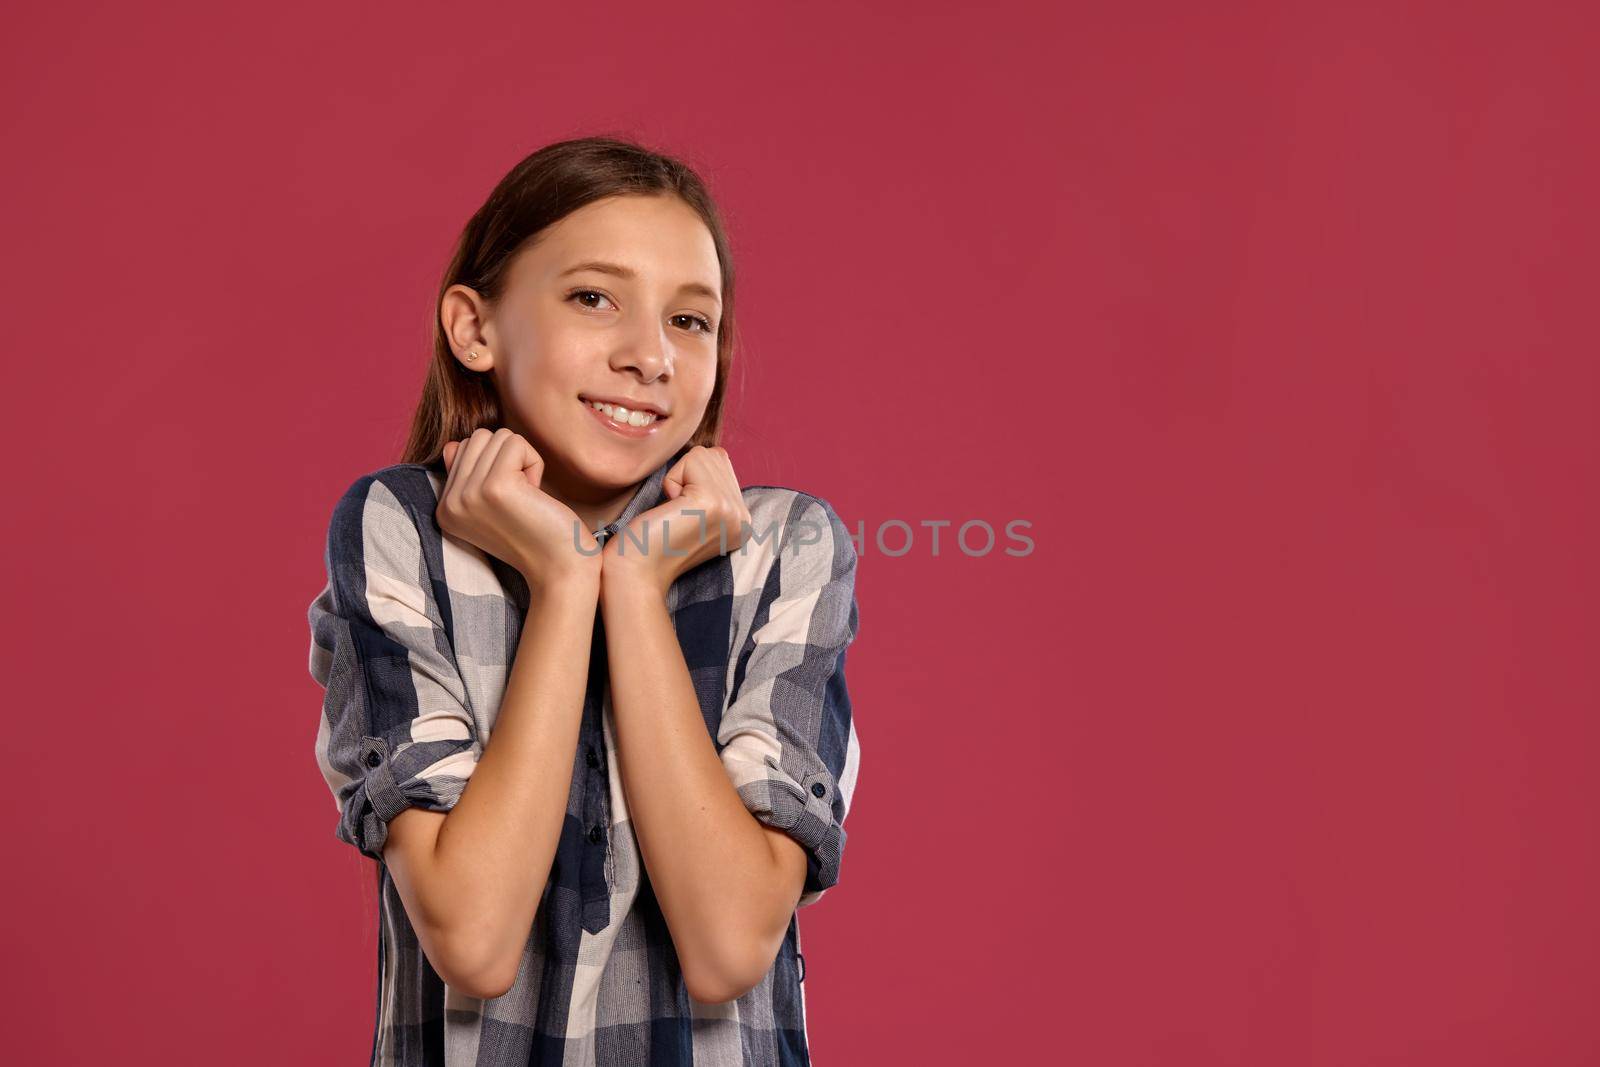 Portrait of a beautiful teenage girl in a casual checkered shirt smiling and looking at the camera while posing against a pink studio background. Long hair, healthy clean skin and brown eyes. Sincere emotions concept. Copy space.